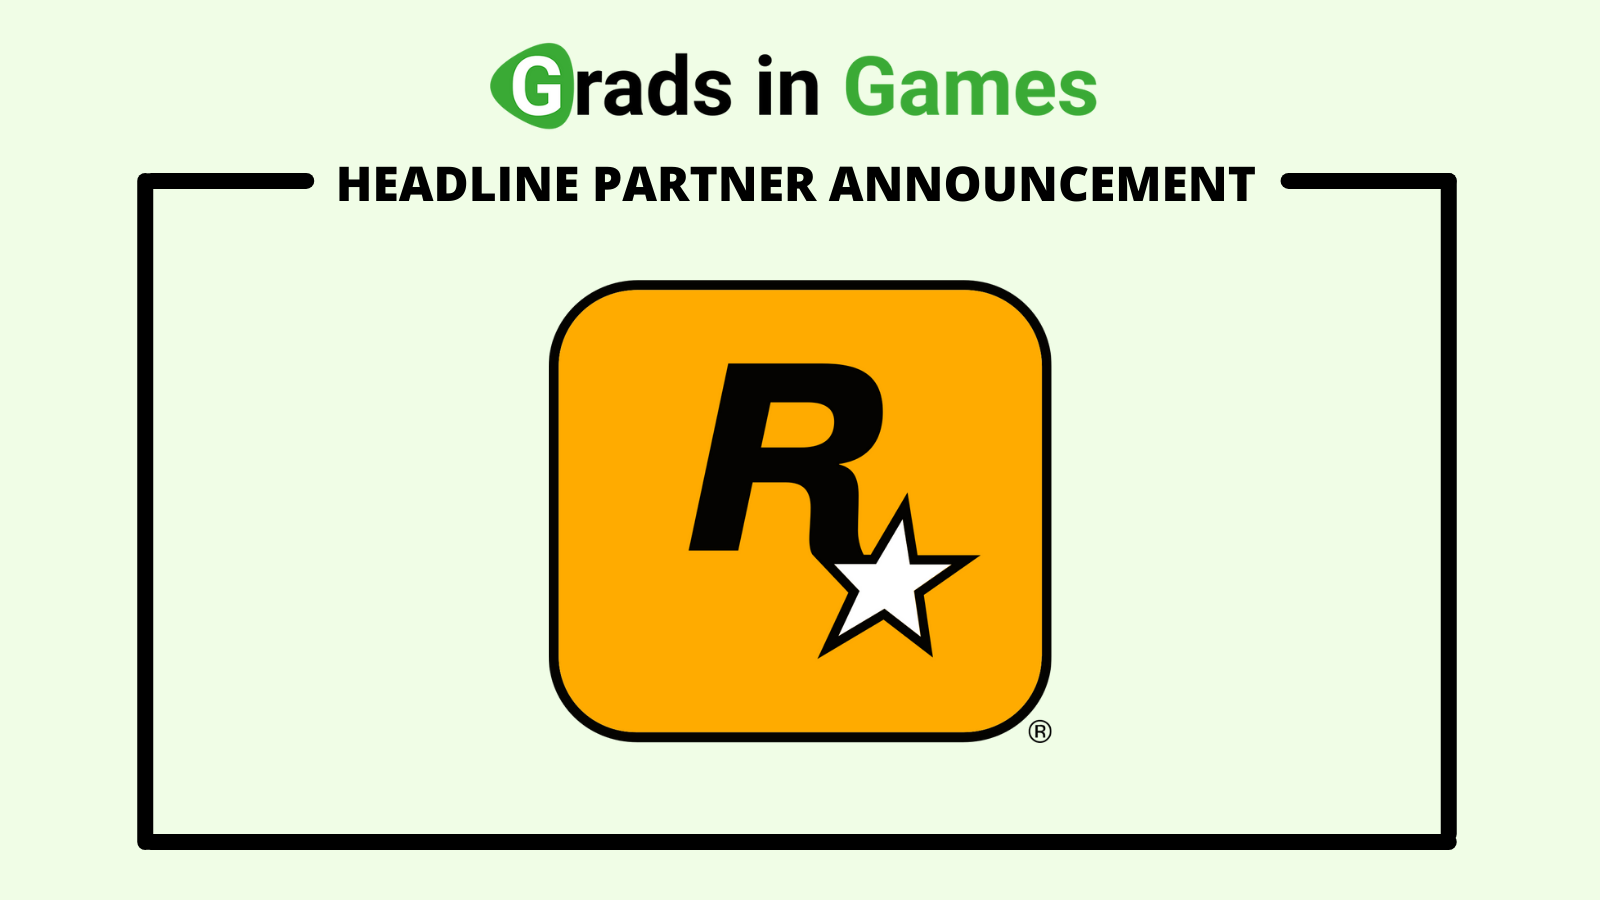 Grads in Games welcomes Rockstar Games as our Headline Partner for 2021/22